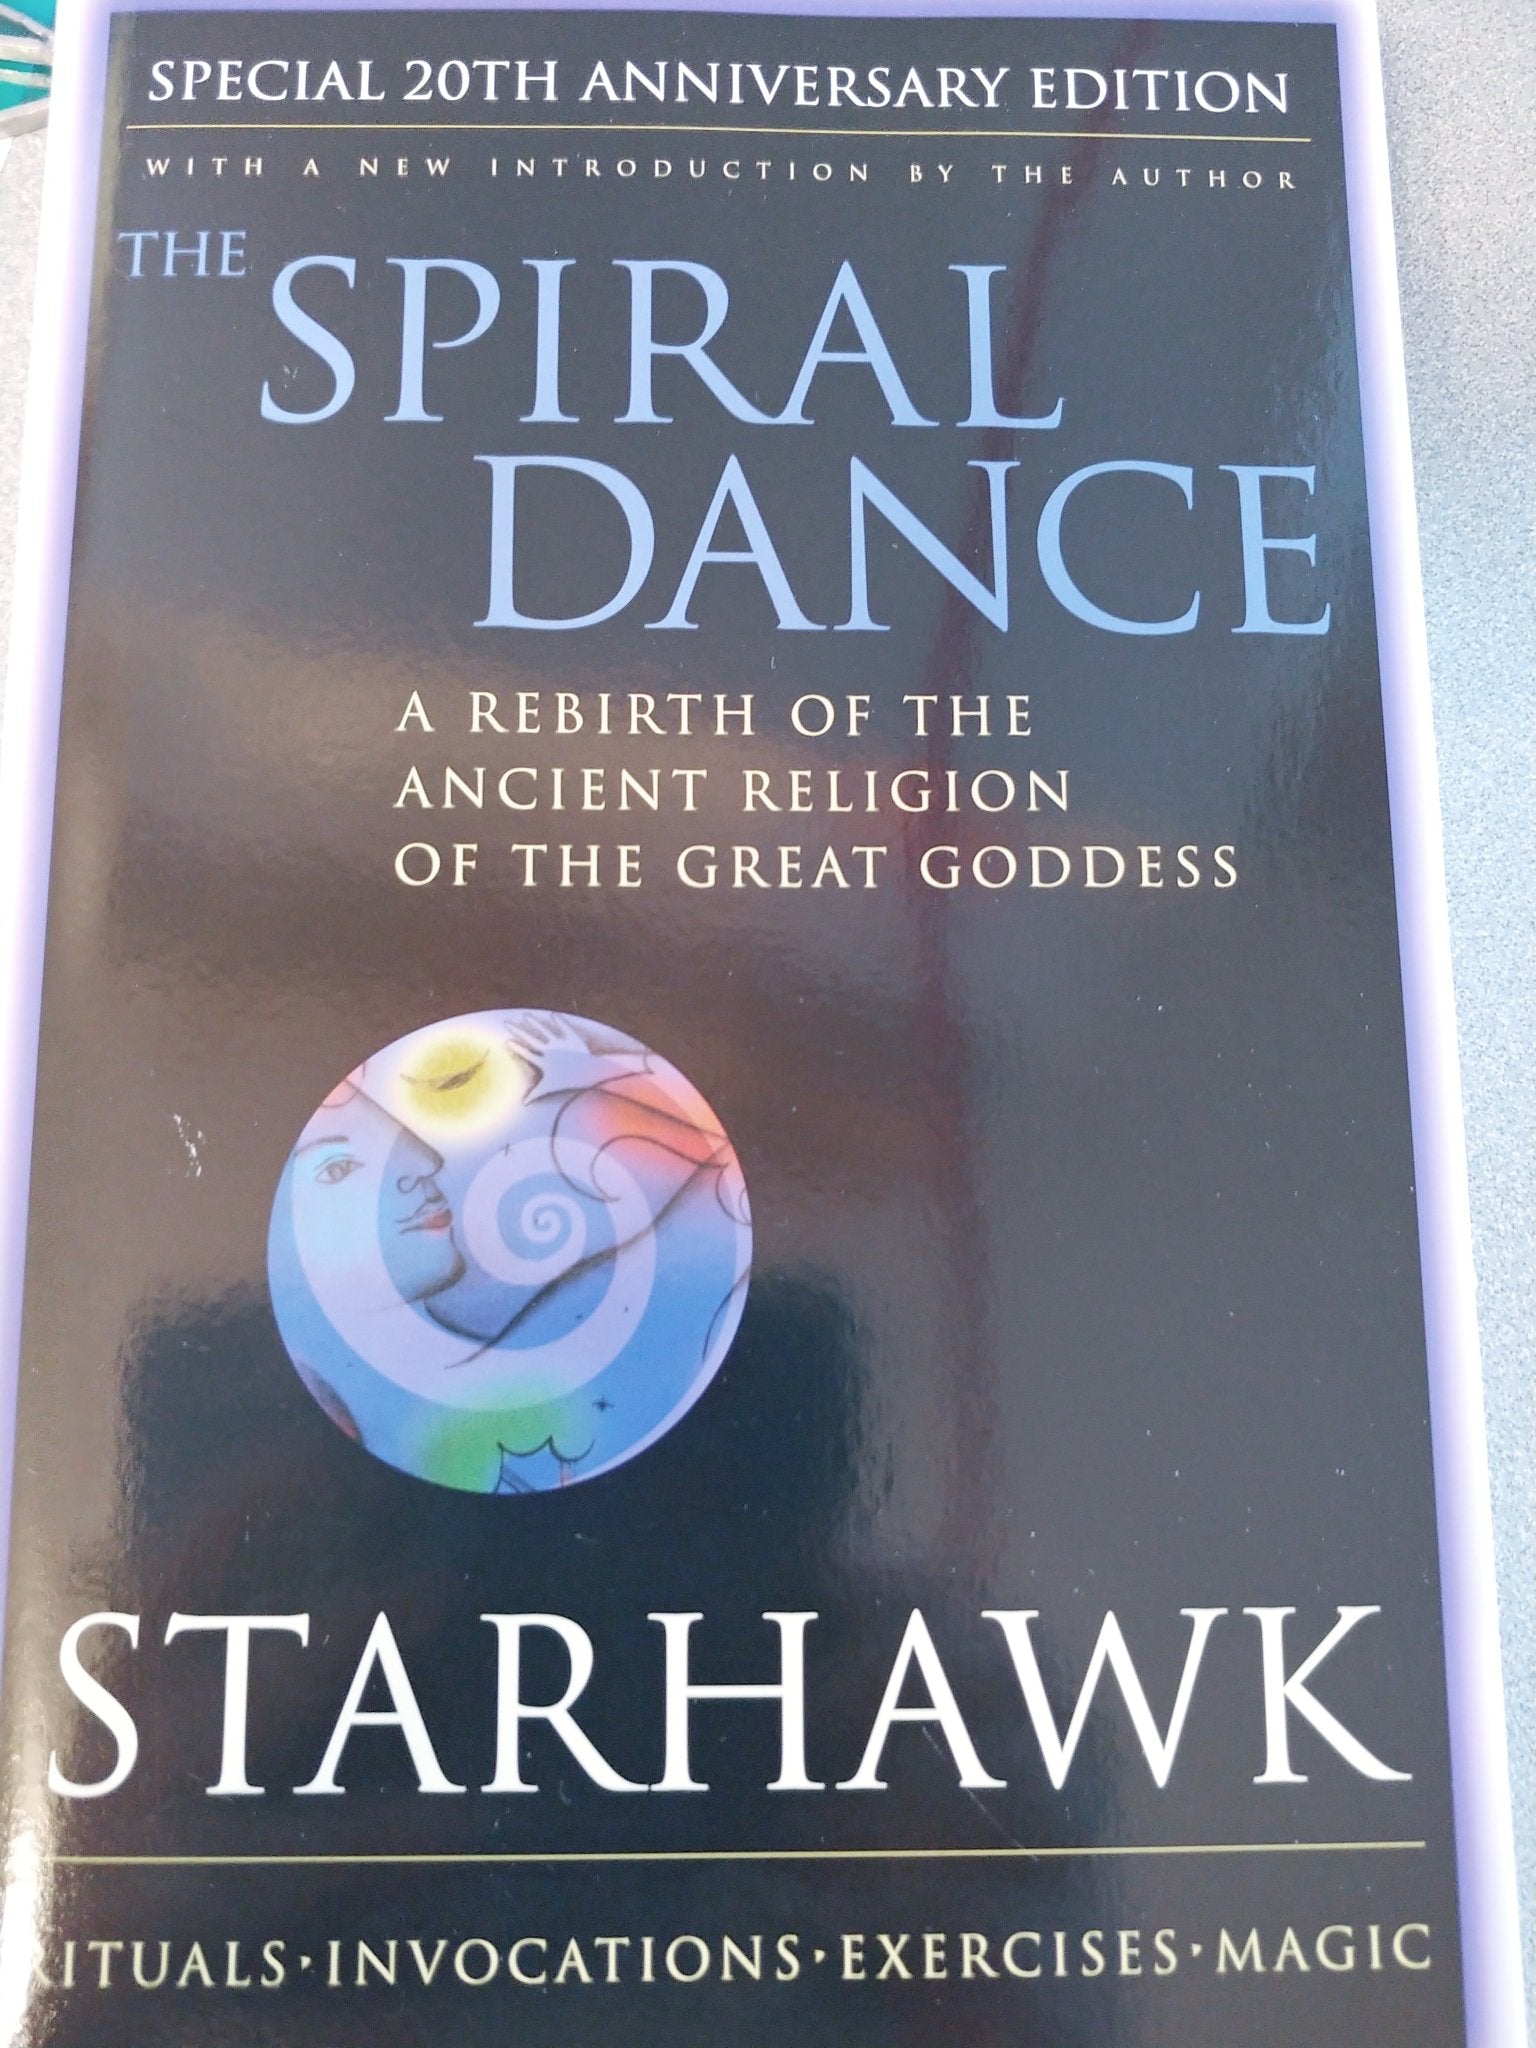 The Spiral Dance | Special 20th Anniversary Edition - Spiral Circle